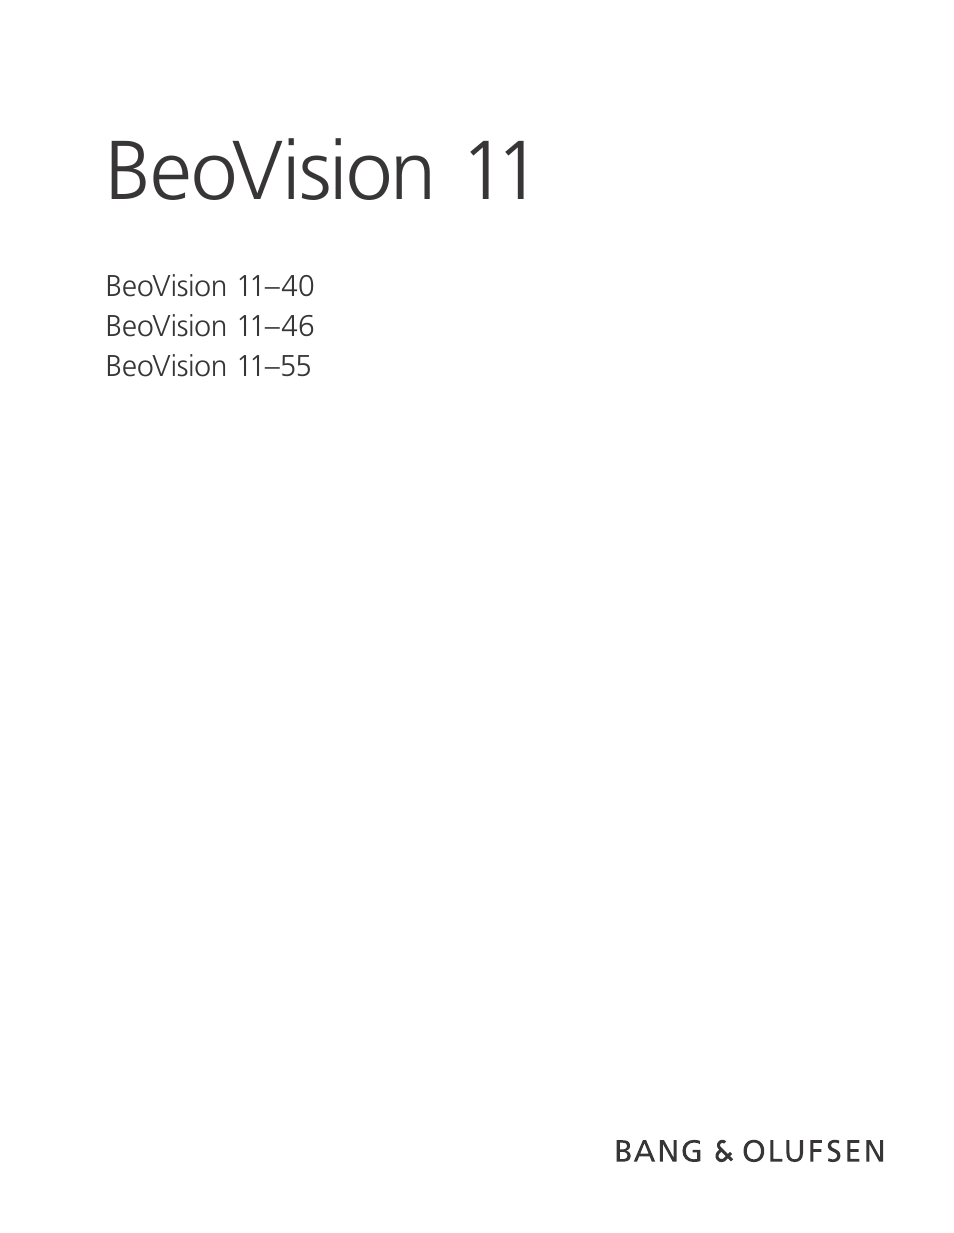 BeoVision 11 with Beo4 User Guide